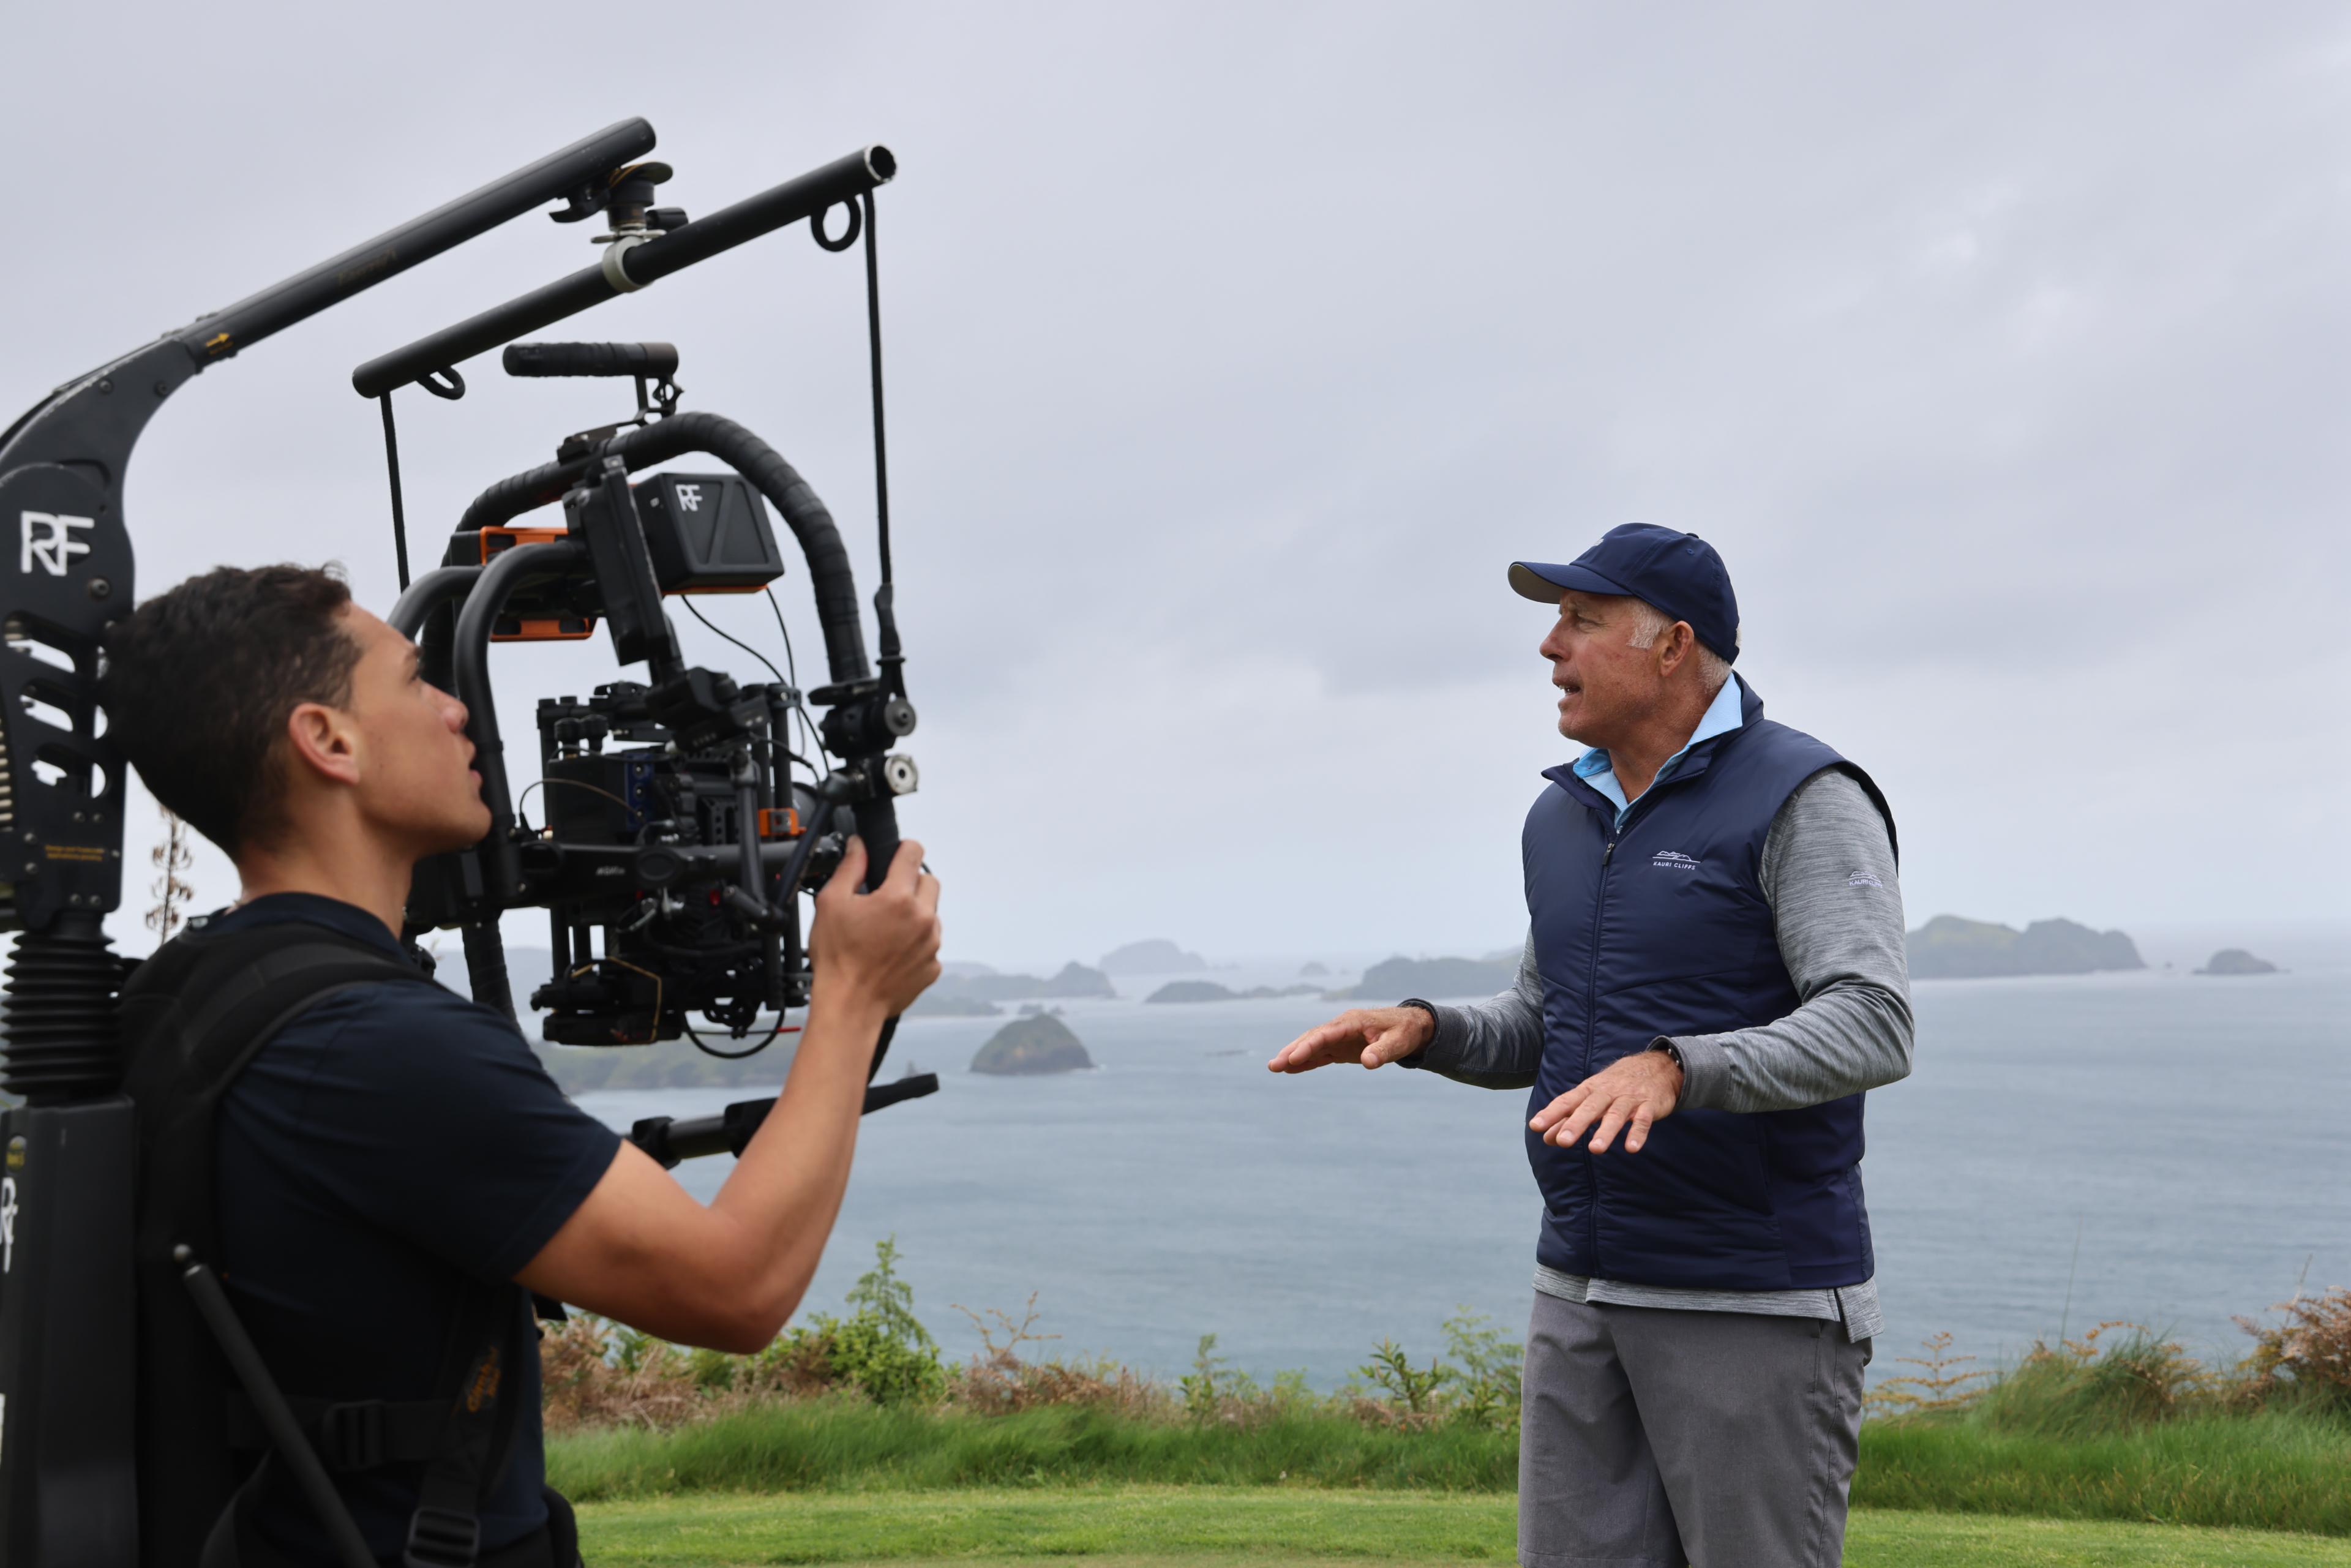 Steve Williams and a camera man with a view of water from the golf course